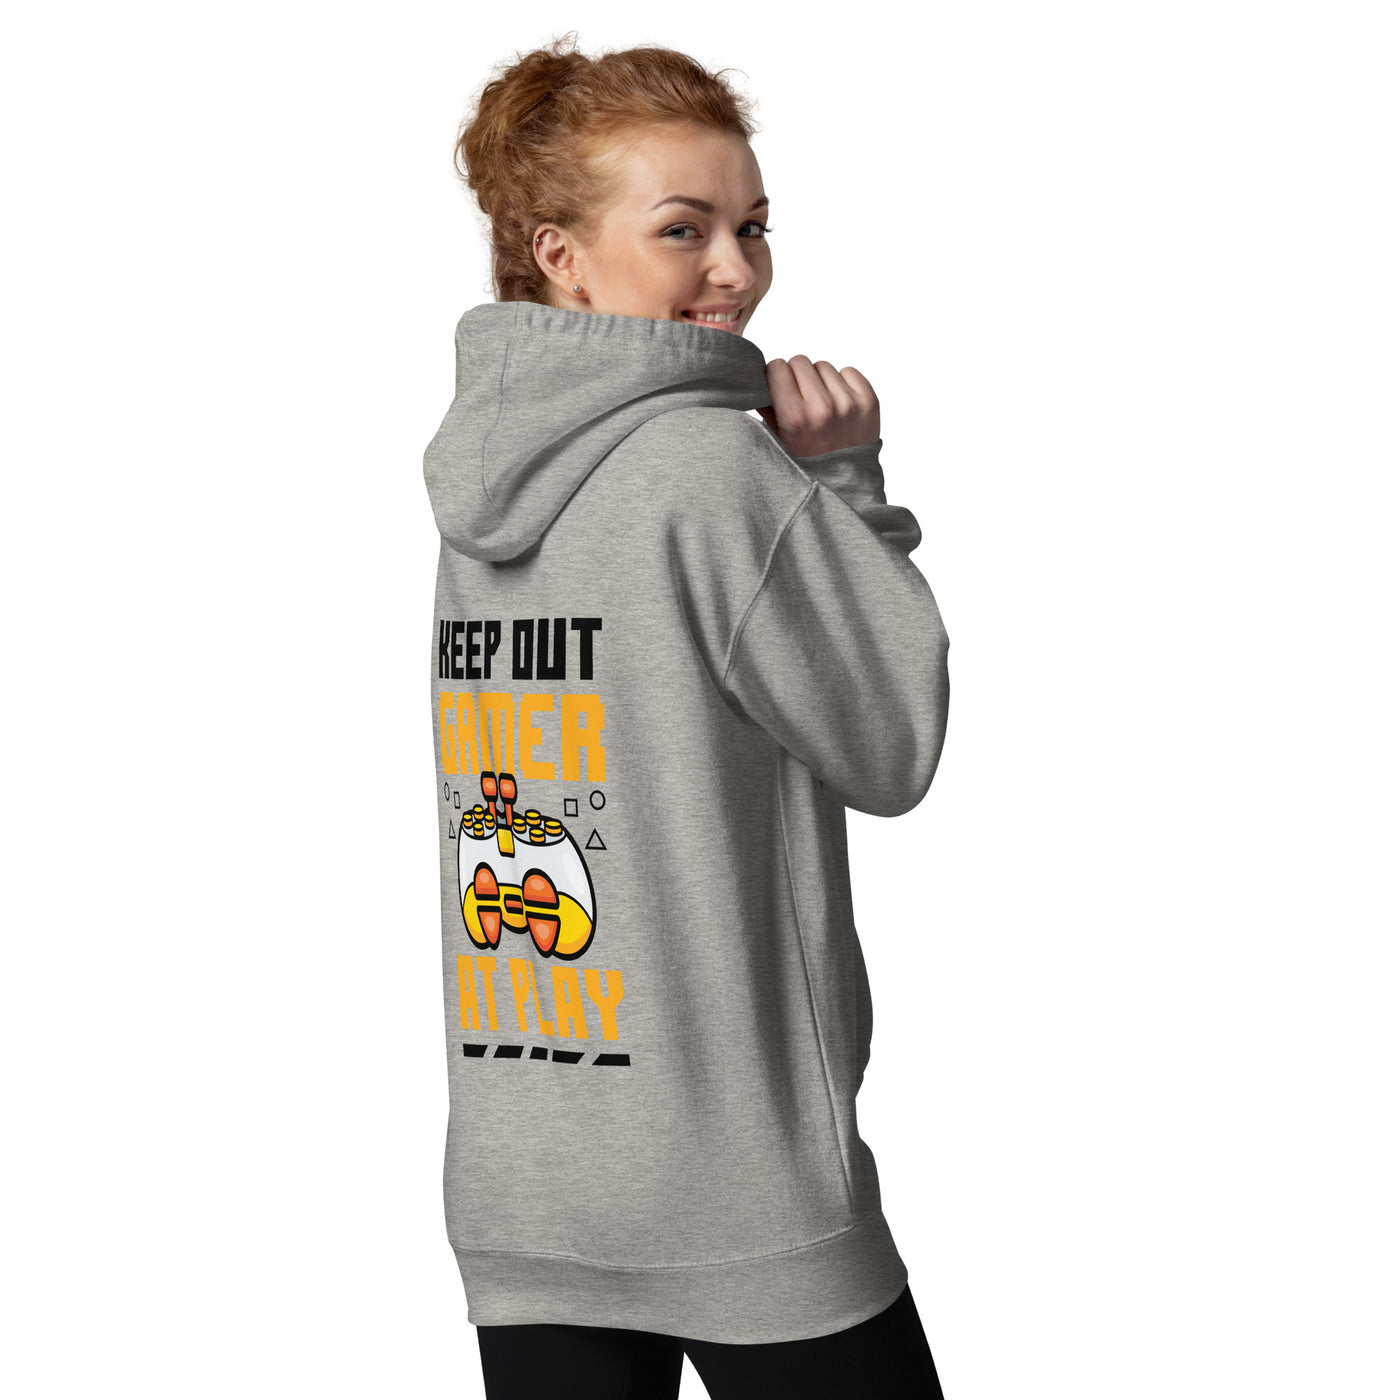 Keep Out Gamer At Play Rima 7 in Dark Text - Unisex Hoodie ( Back Print )